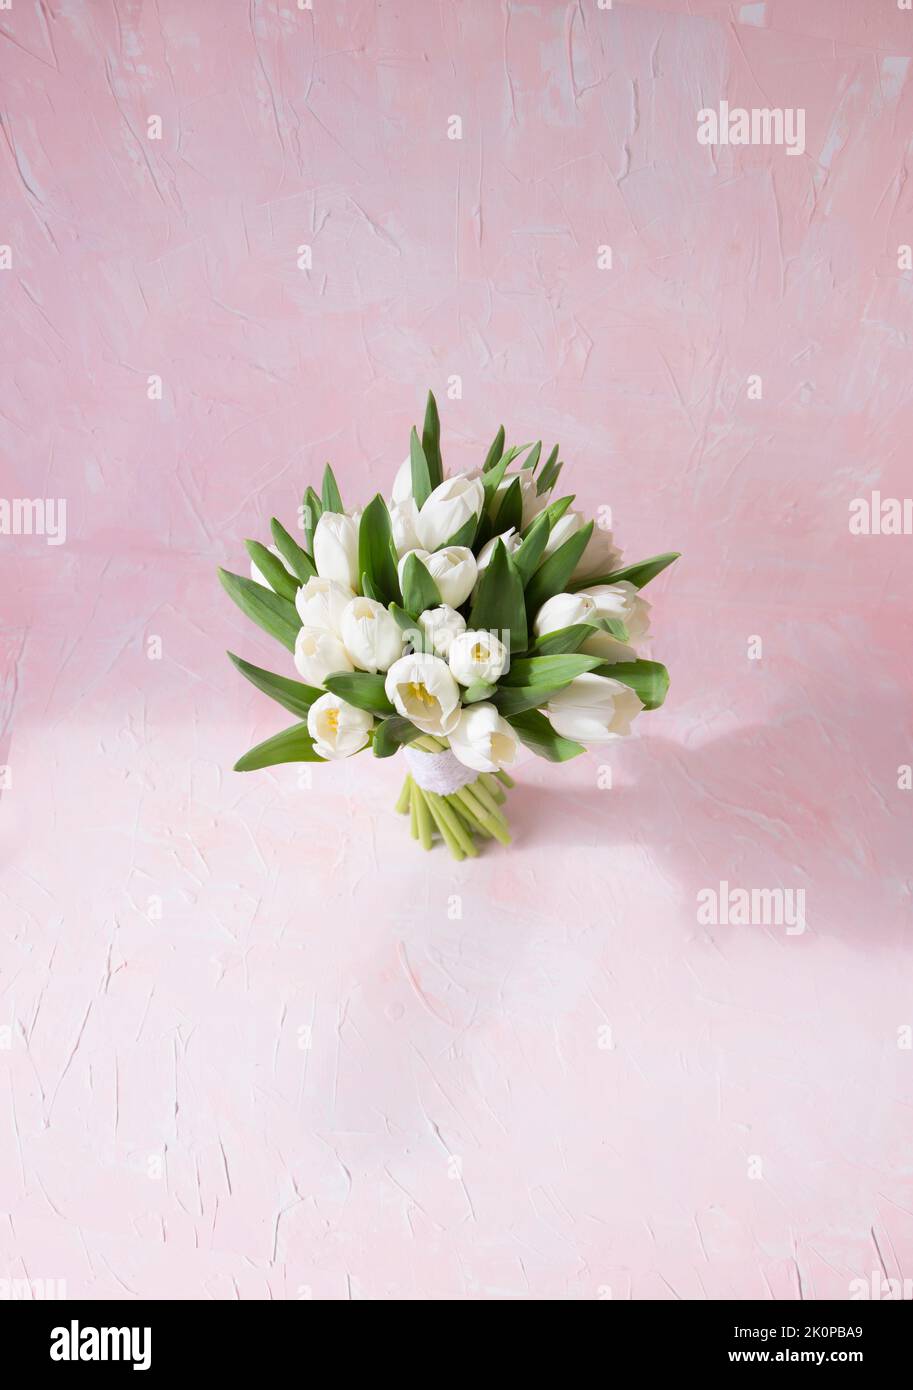 White tulips bouquet flowers and ray of light on vintage pink background. Top view with copy space. Studio shot photo. Stock Photo